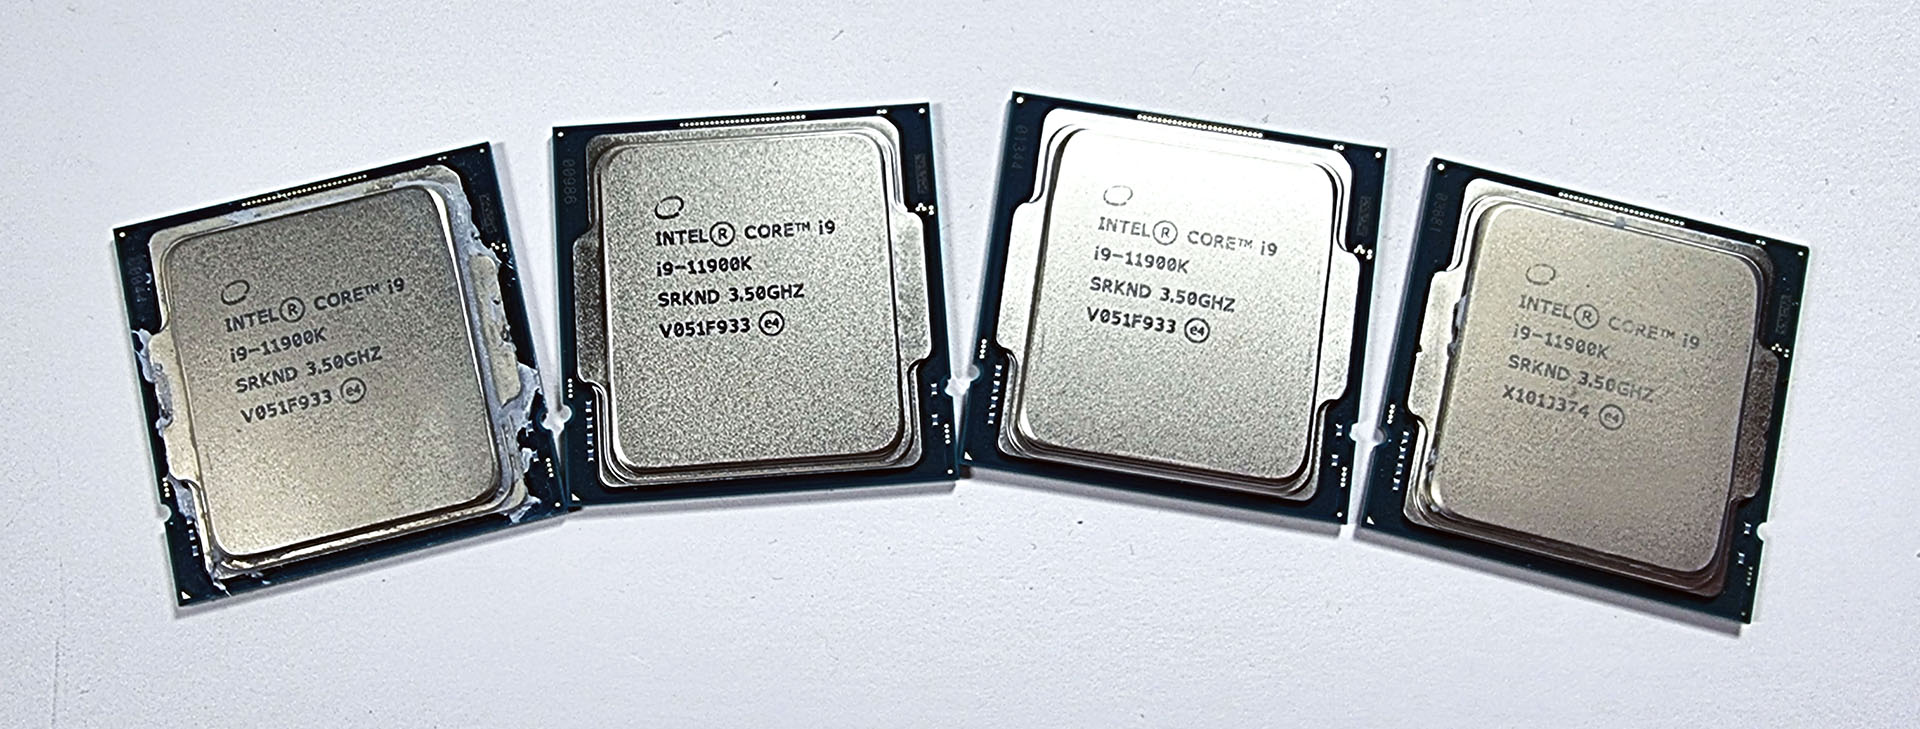 Conclusion - Multi-chip Intel Core i9-11900K Overclocking Review